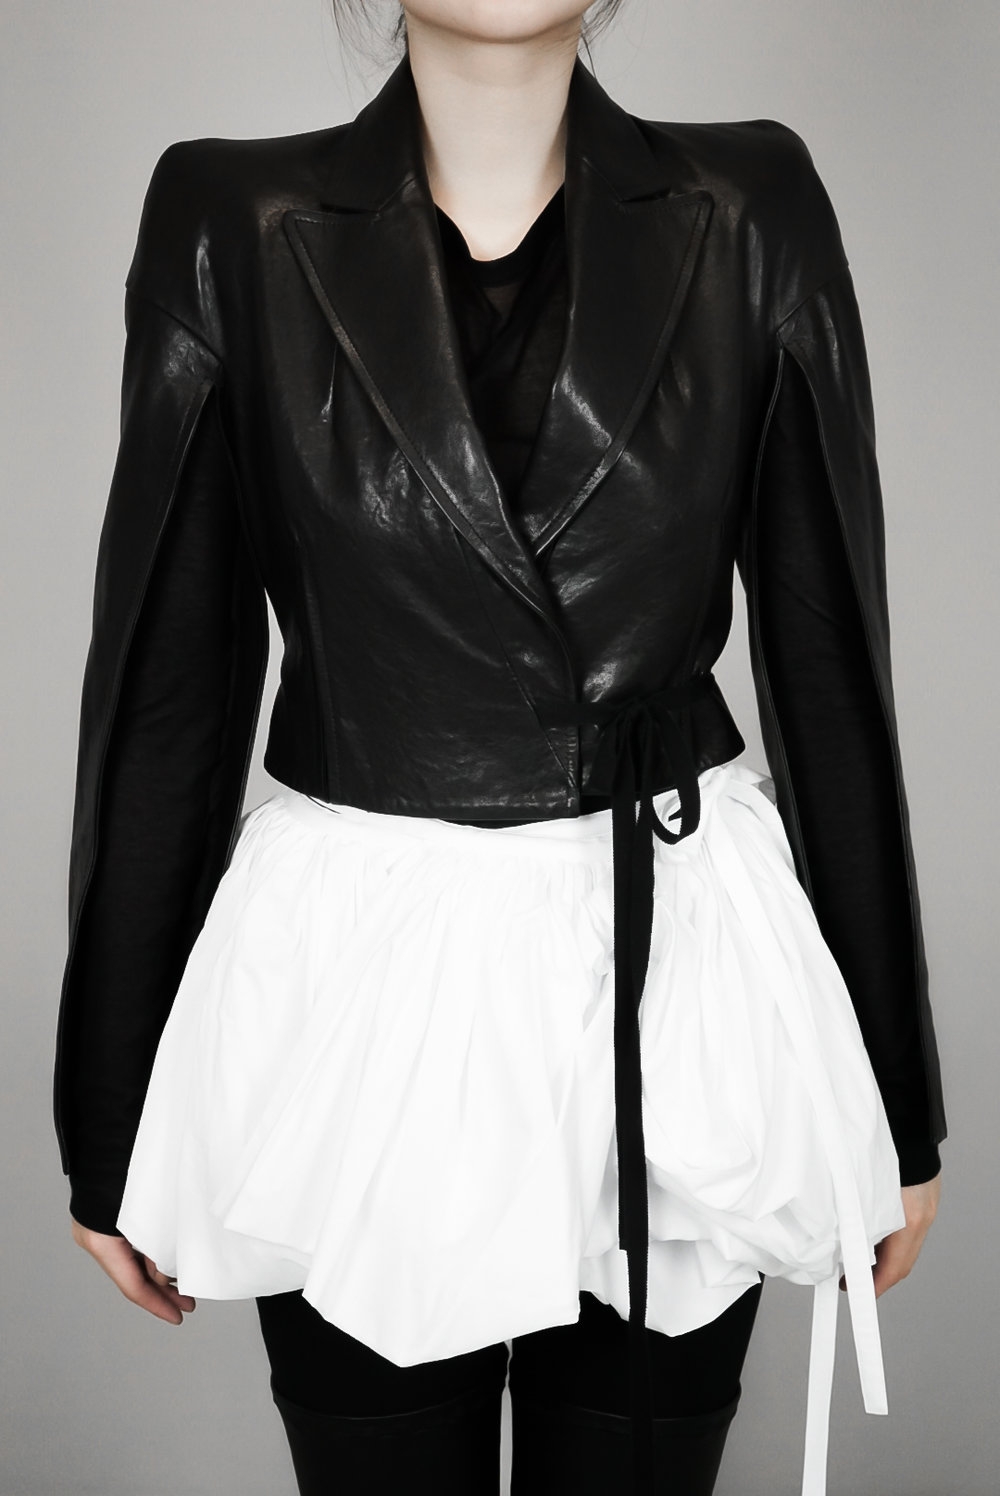 Ann Demeulemeester – Womens – Cropped Jacket – Black – Leather – Tailored – Open Sleeves & Back